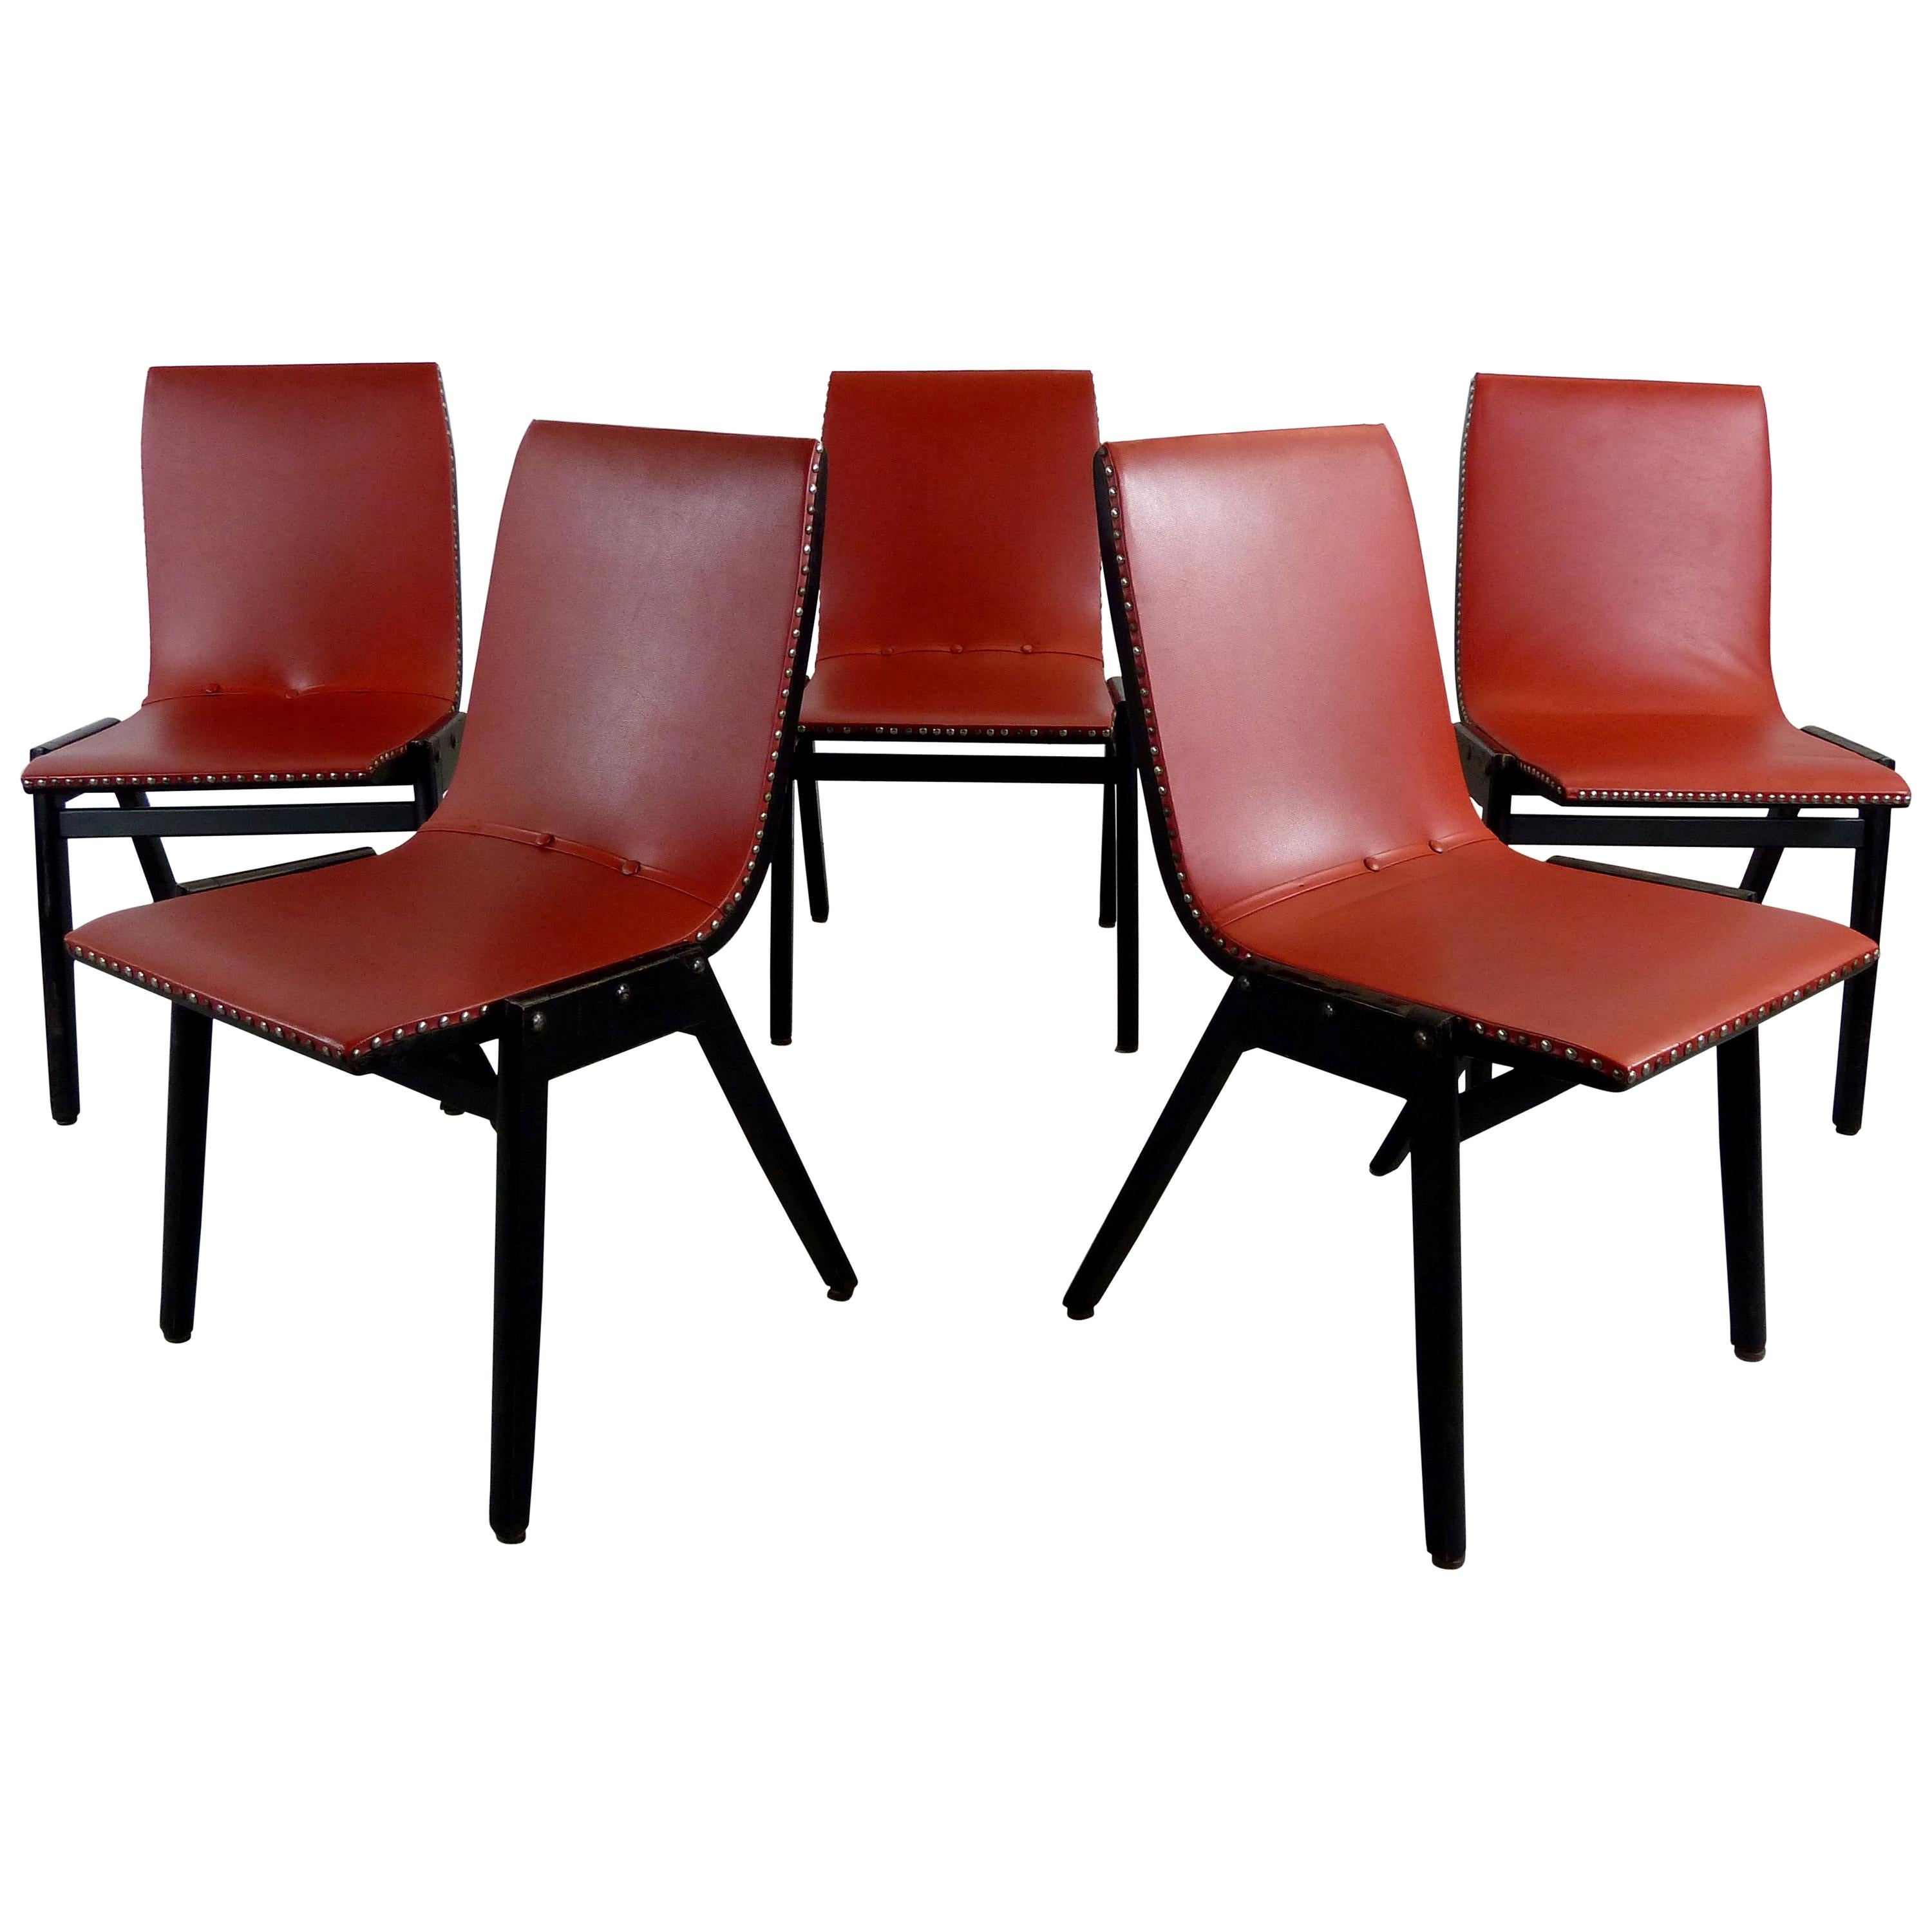 Set of 5 Midcentury Dining Chairs from Austrian Designer Roland Rainer For Sale